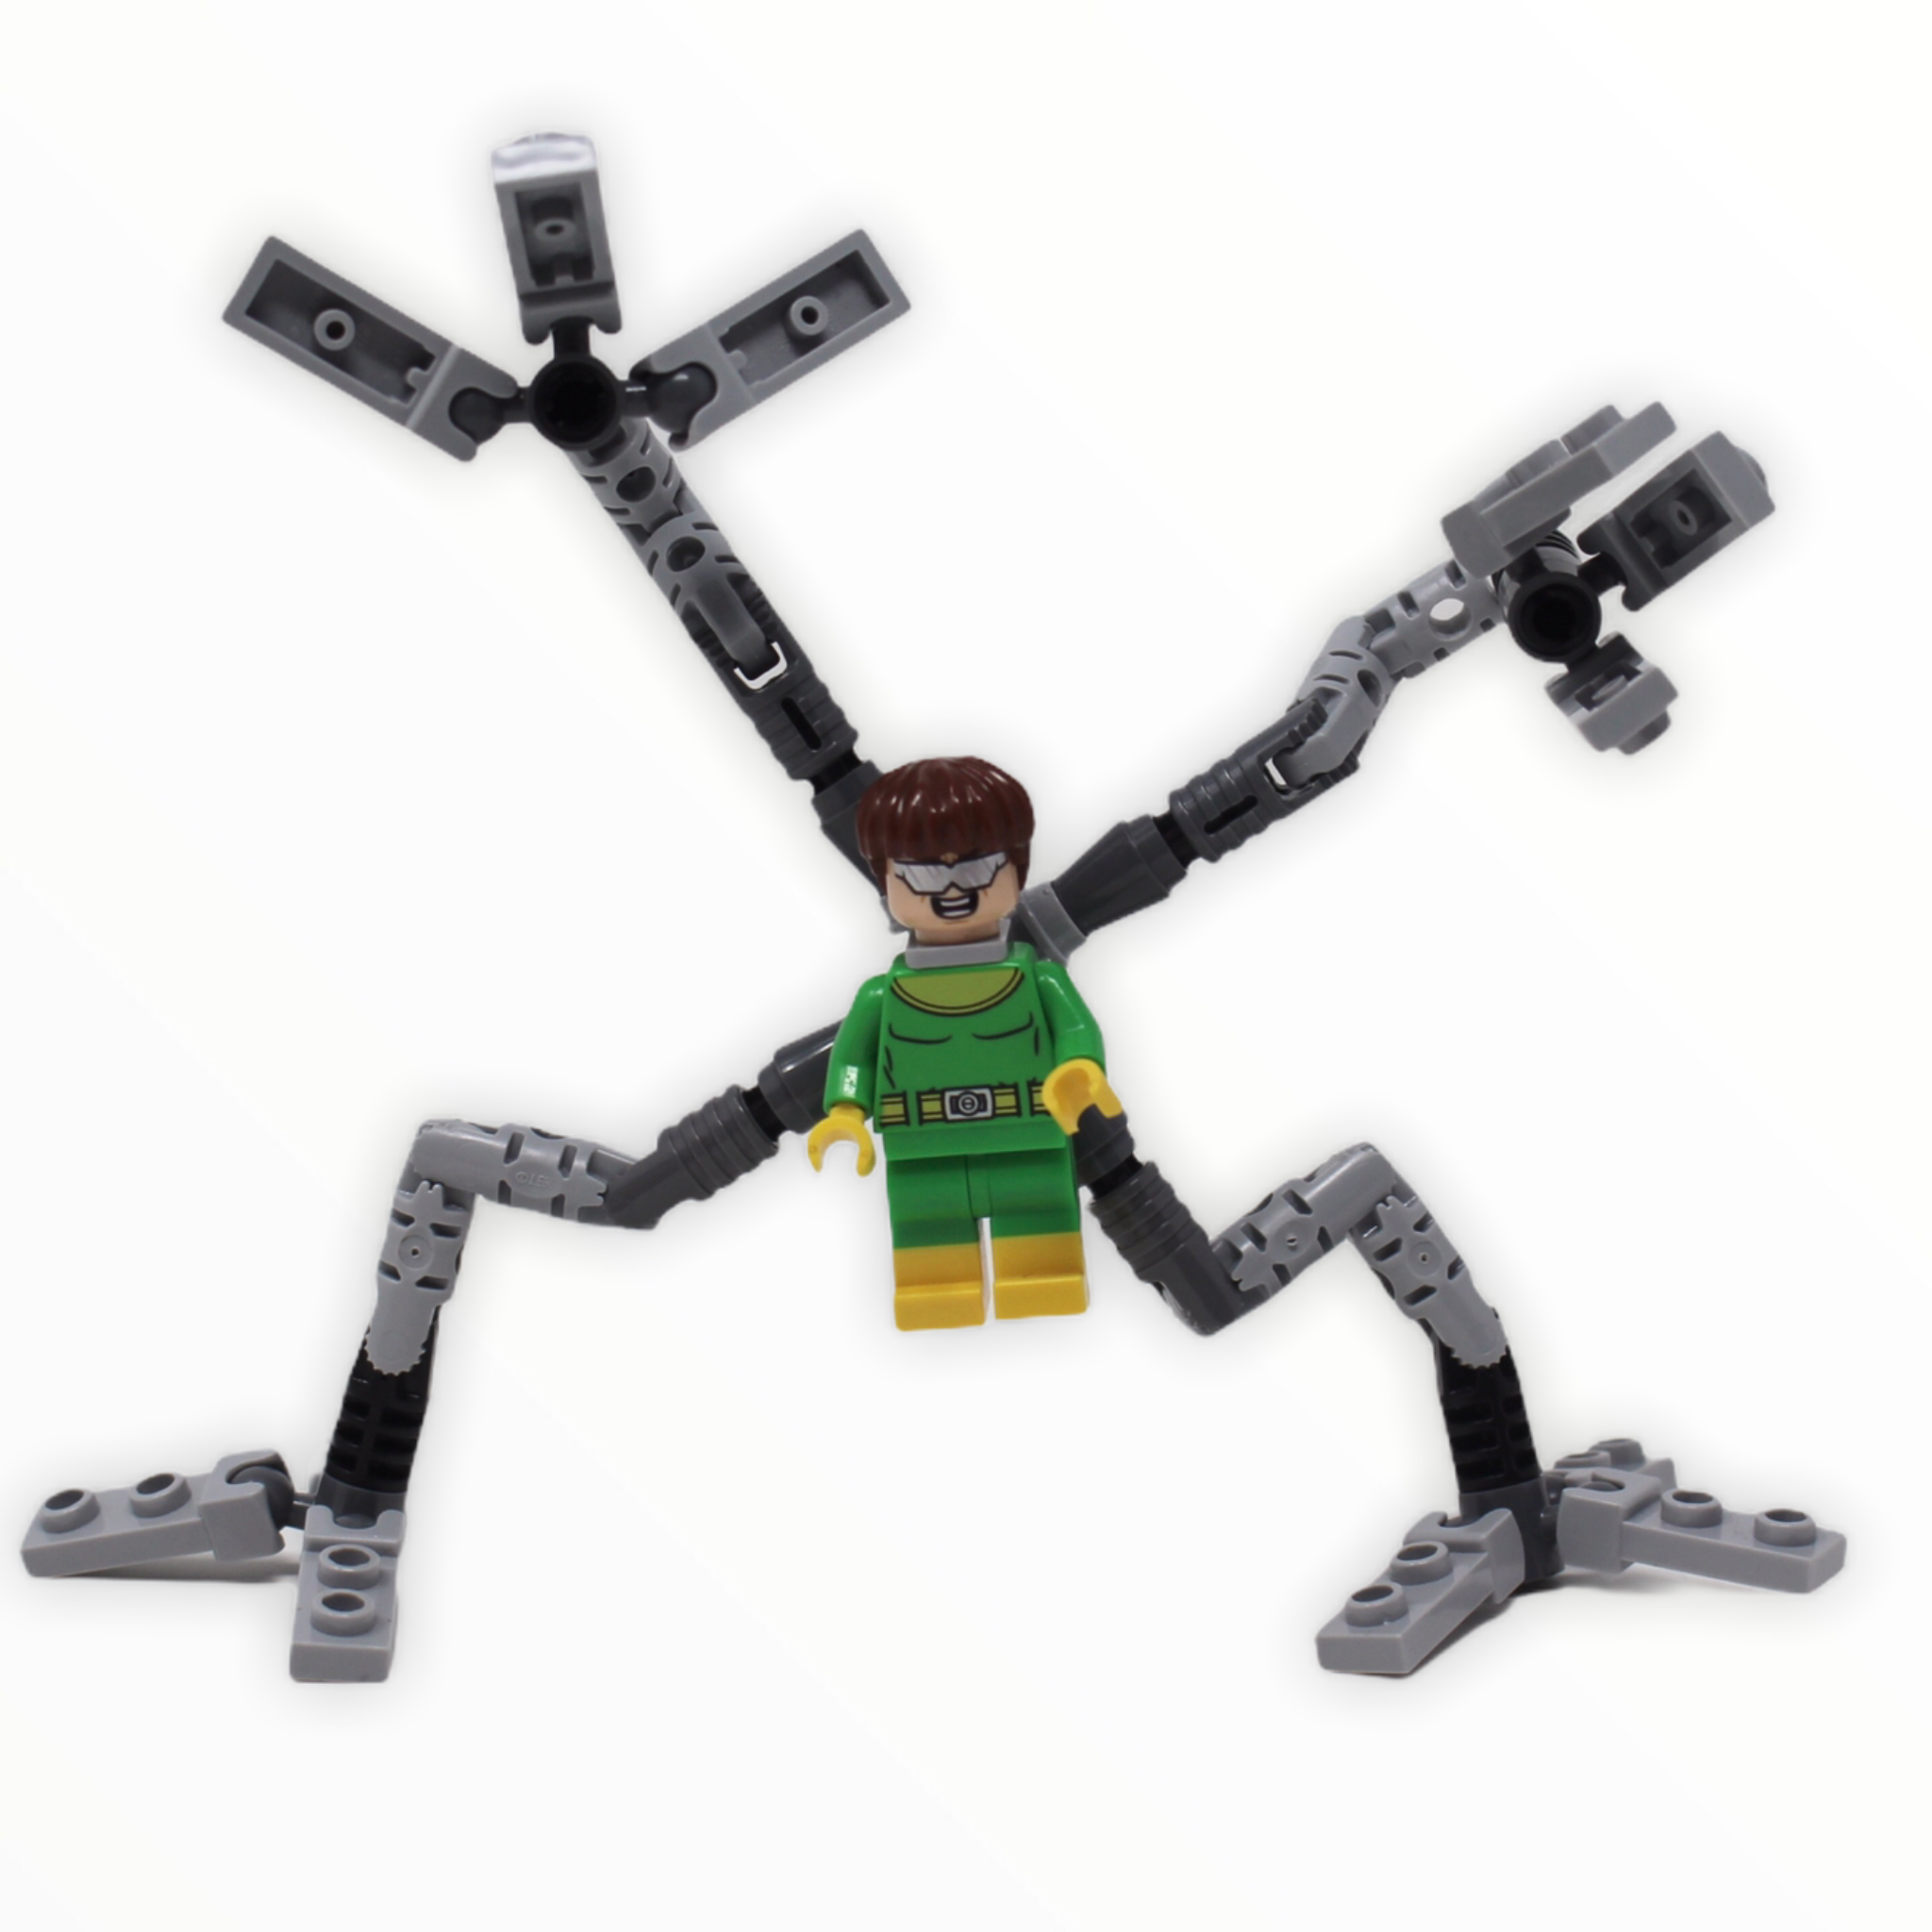 Dr. Octopus (Doc Ock, bright green and yellow suit, large tentacles)